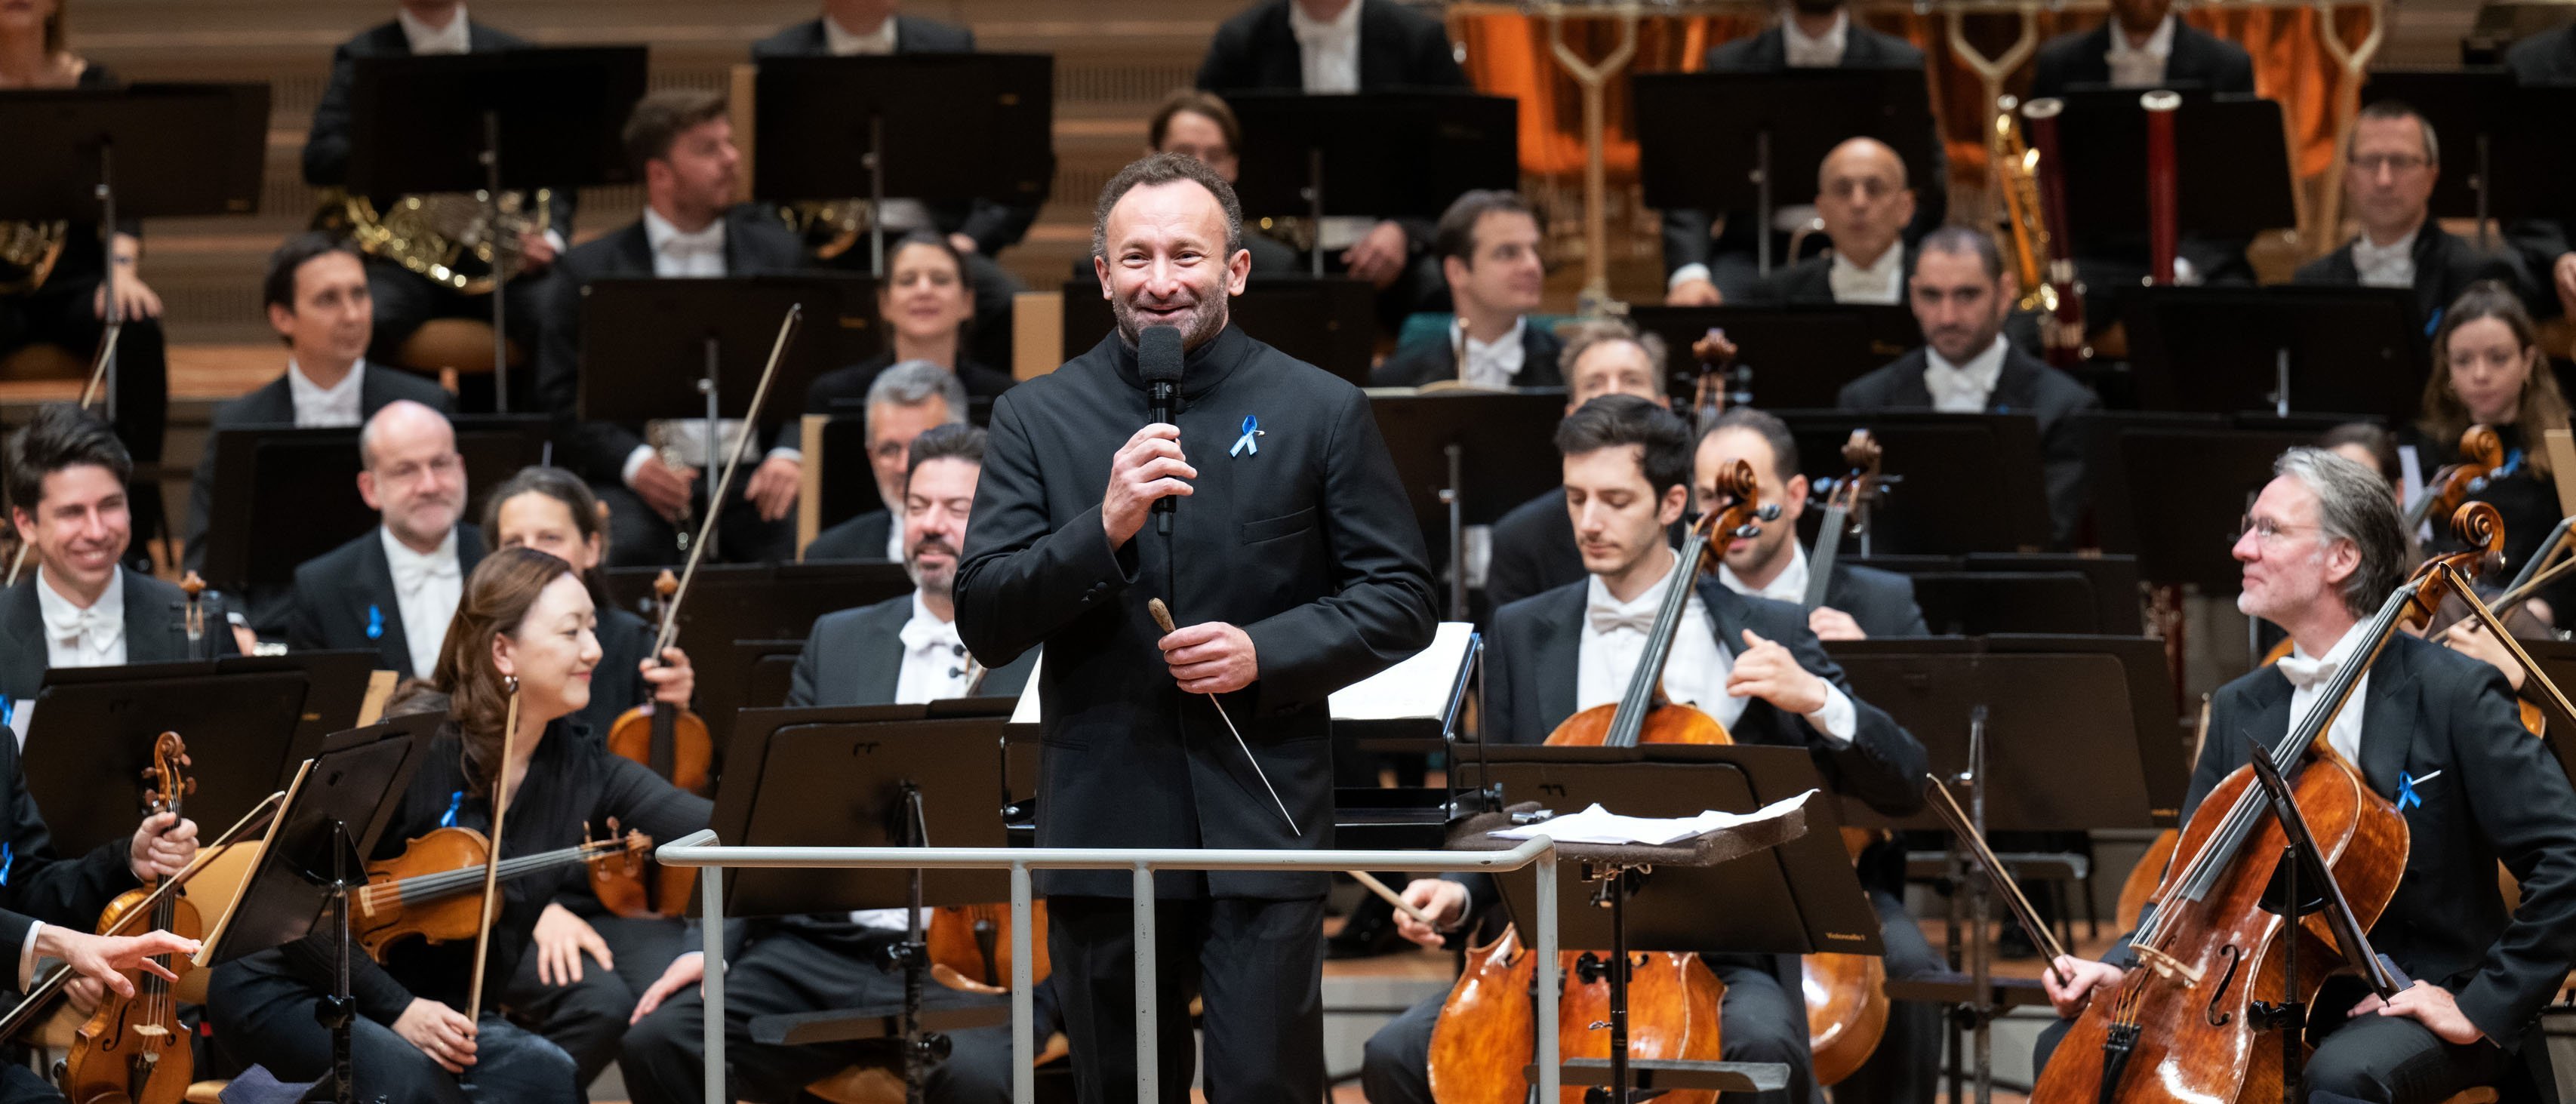 Kirill Petrenko with microphone in front of the orchestra